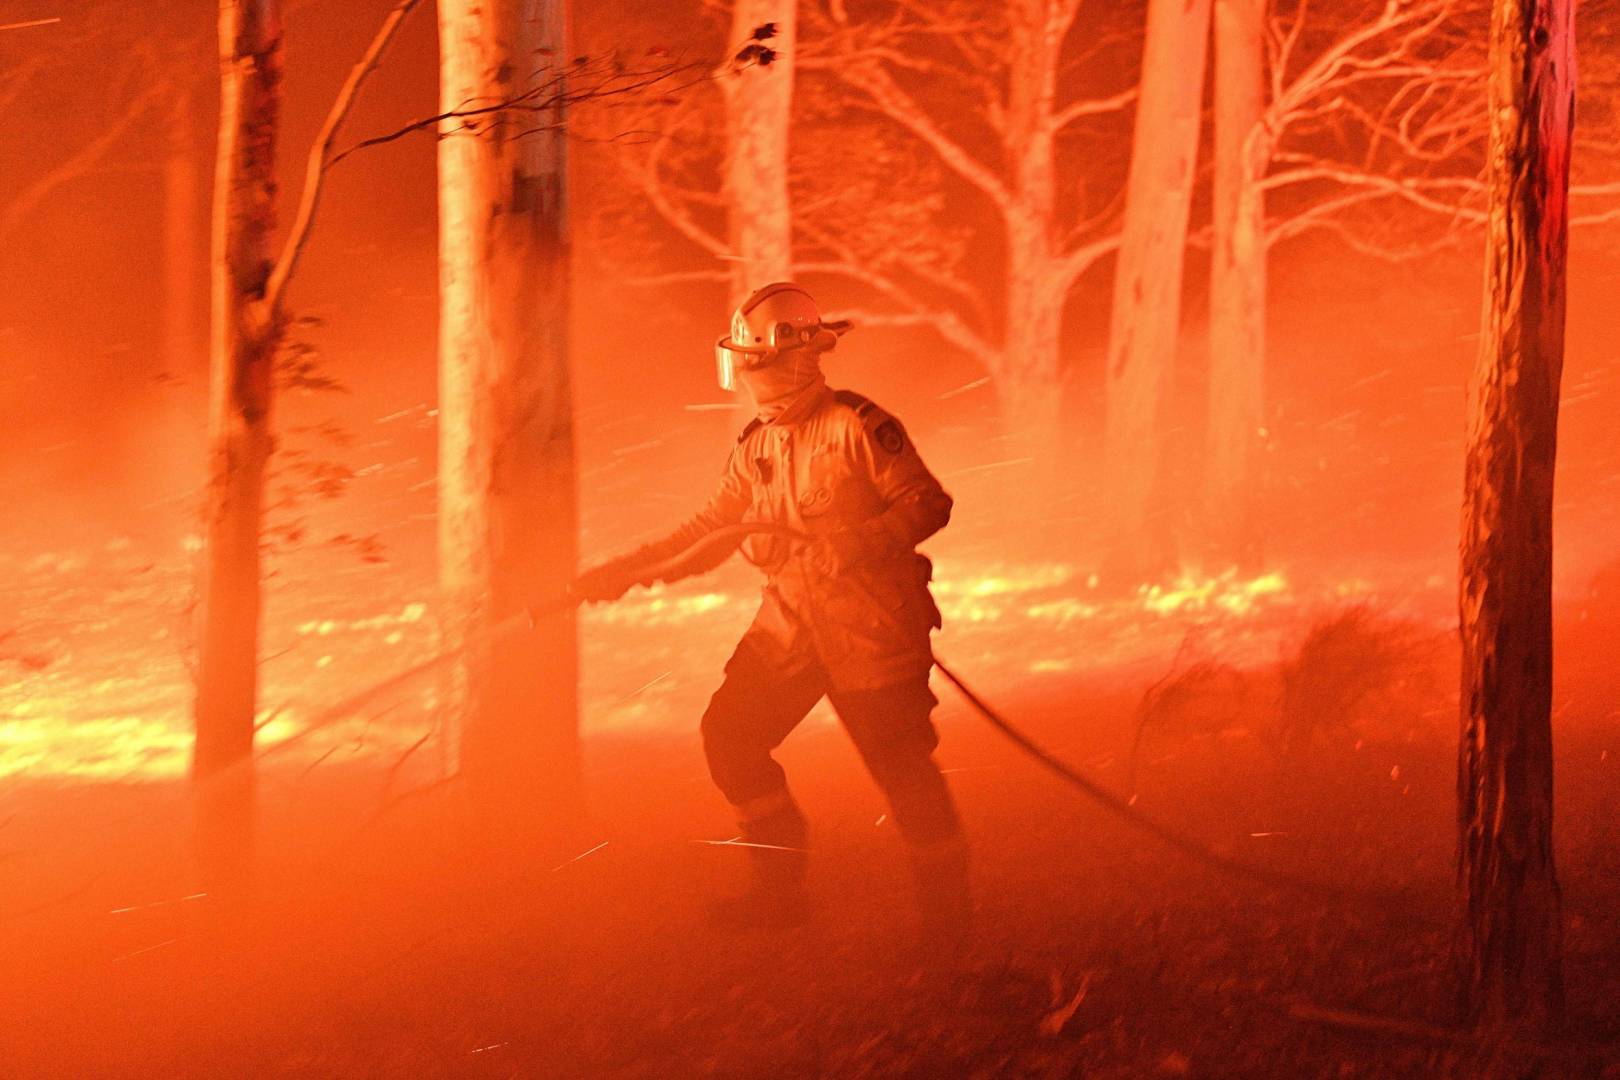 Kiwi casino gamers step up to help out with wildfire crisis in Australia